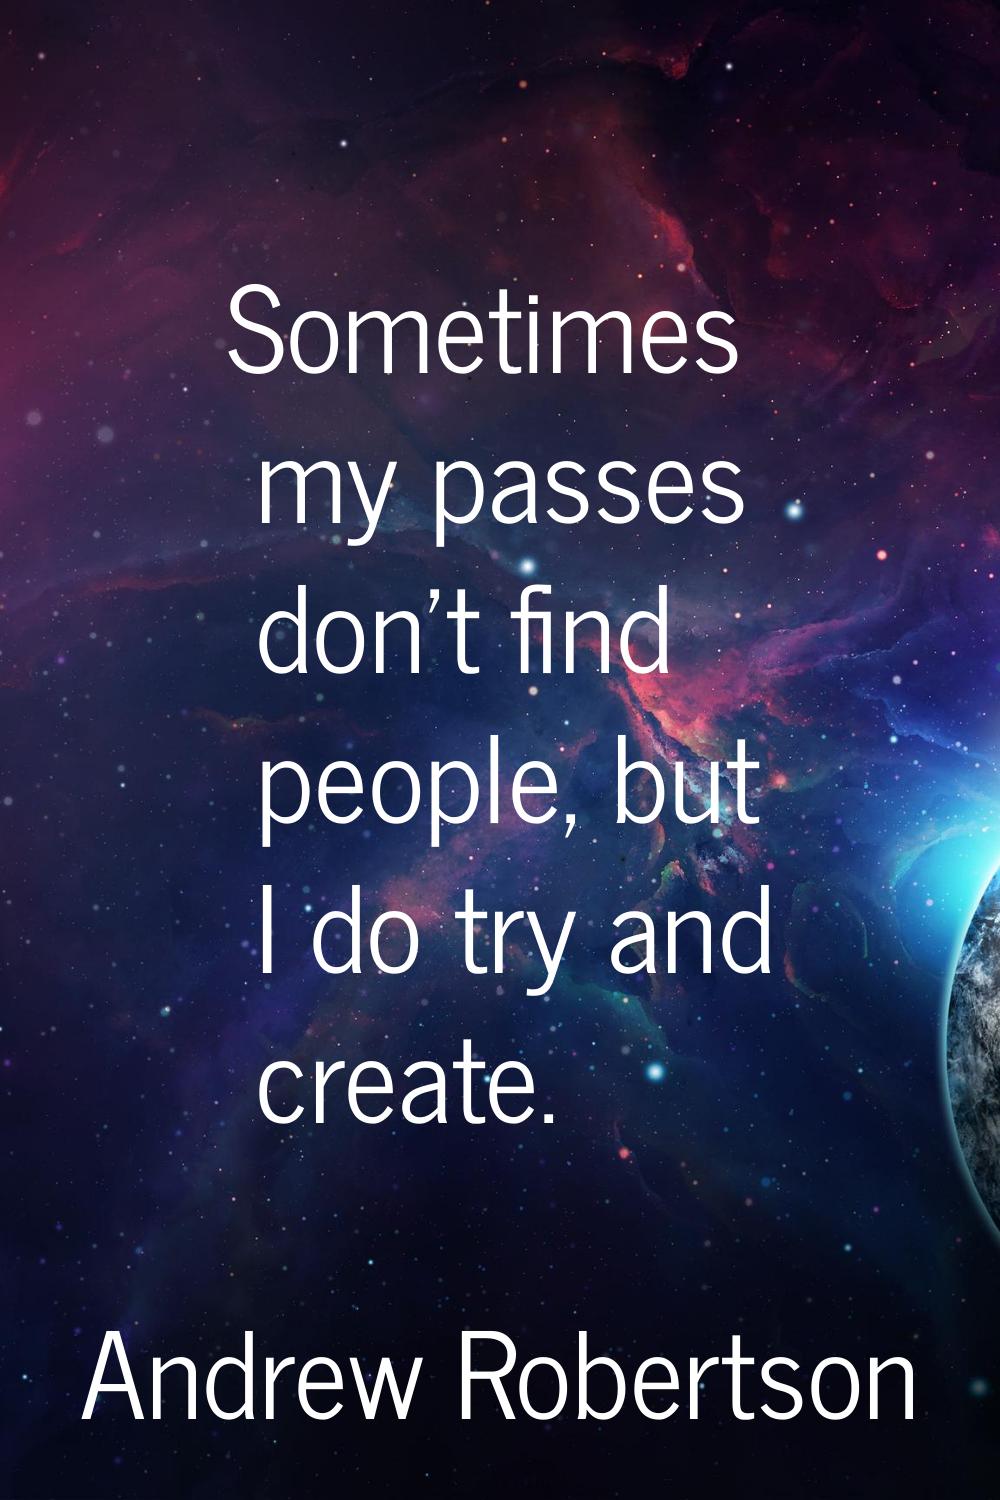 Sometimes my passes don't find people, but I do try and create.